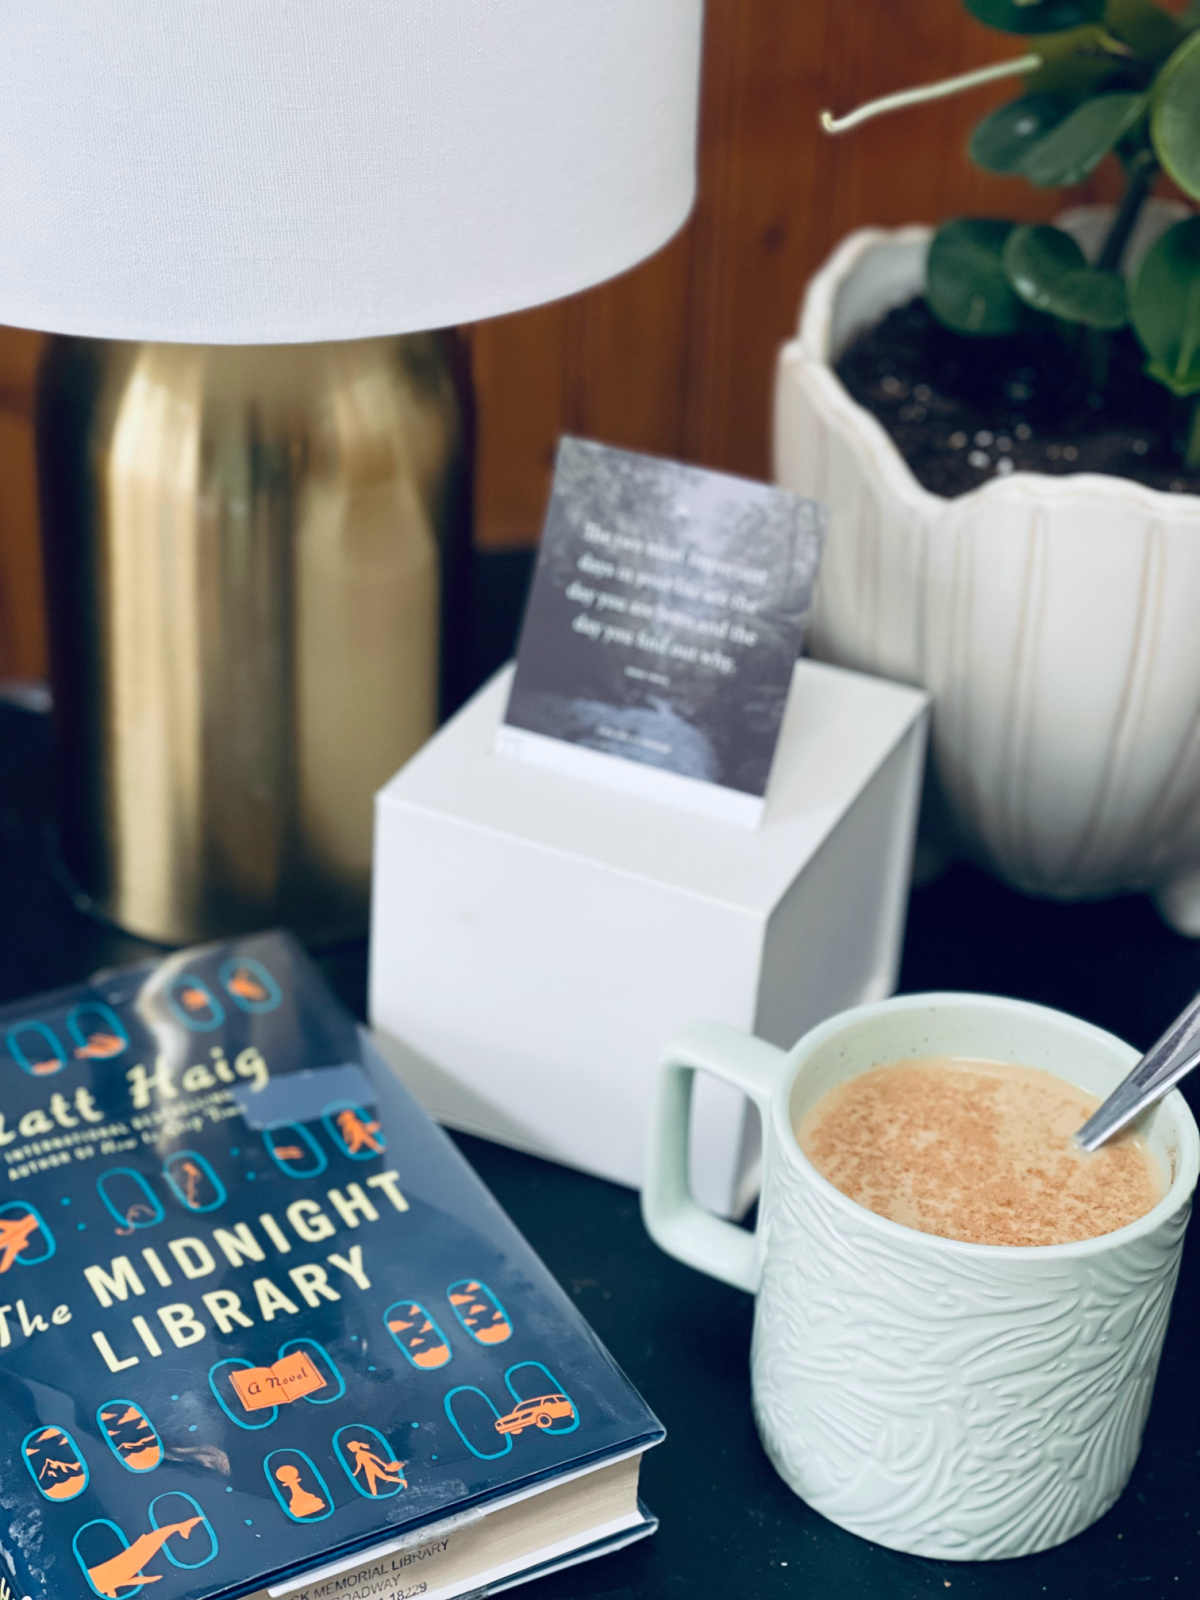 coffee and book The Midnight Library sitting on table near lamp, plant and calendar quote cards.